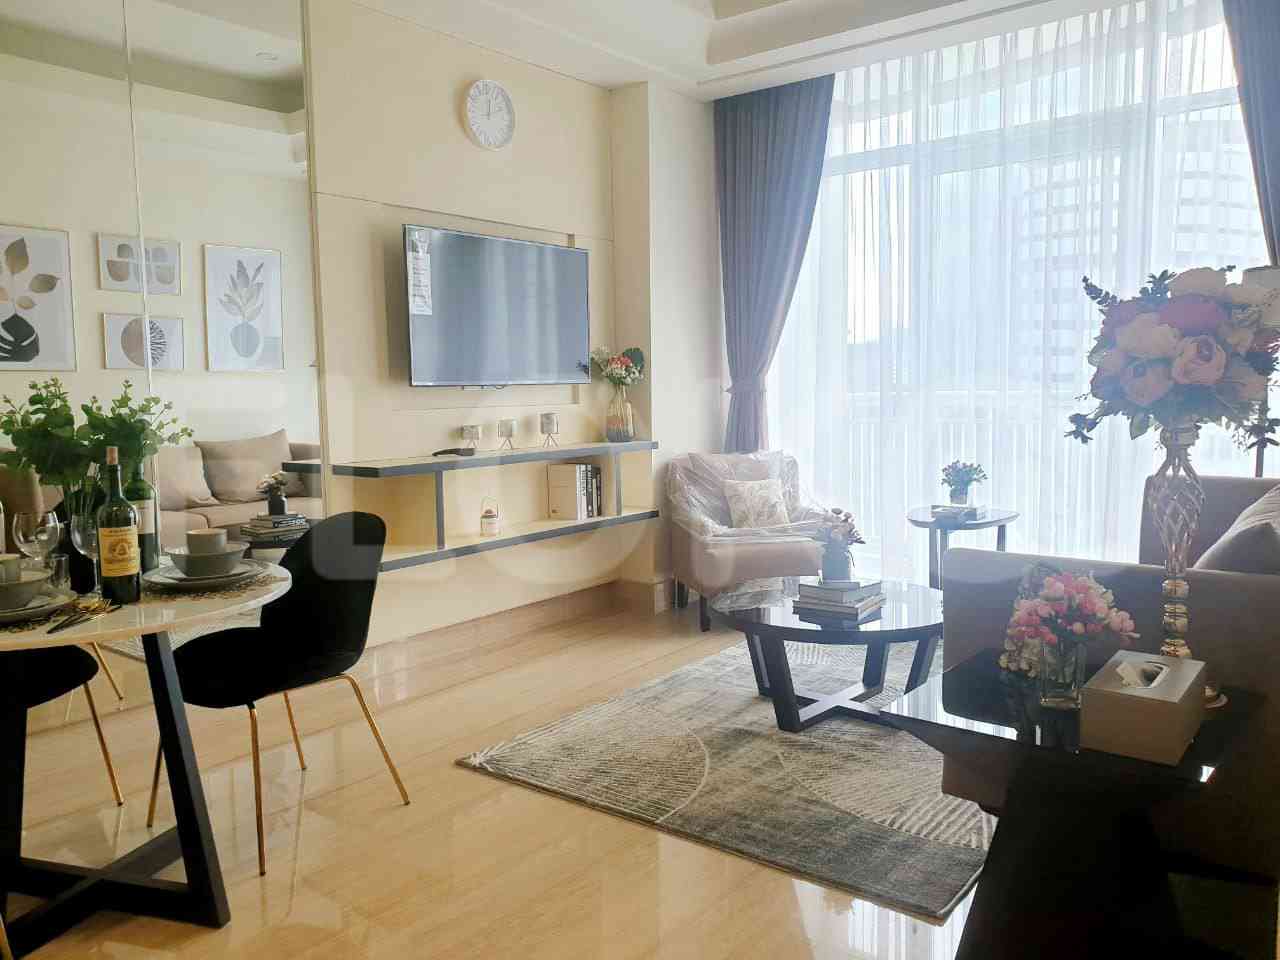 2 Bedroom on 36th Floor for Rent in South Hills Apartment - fku3f9 2